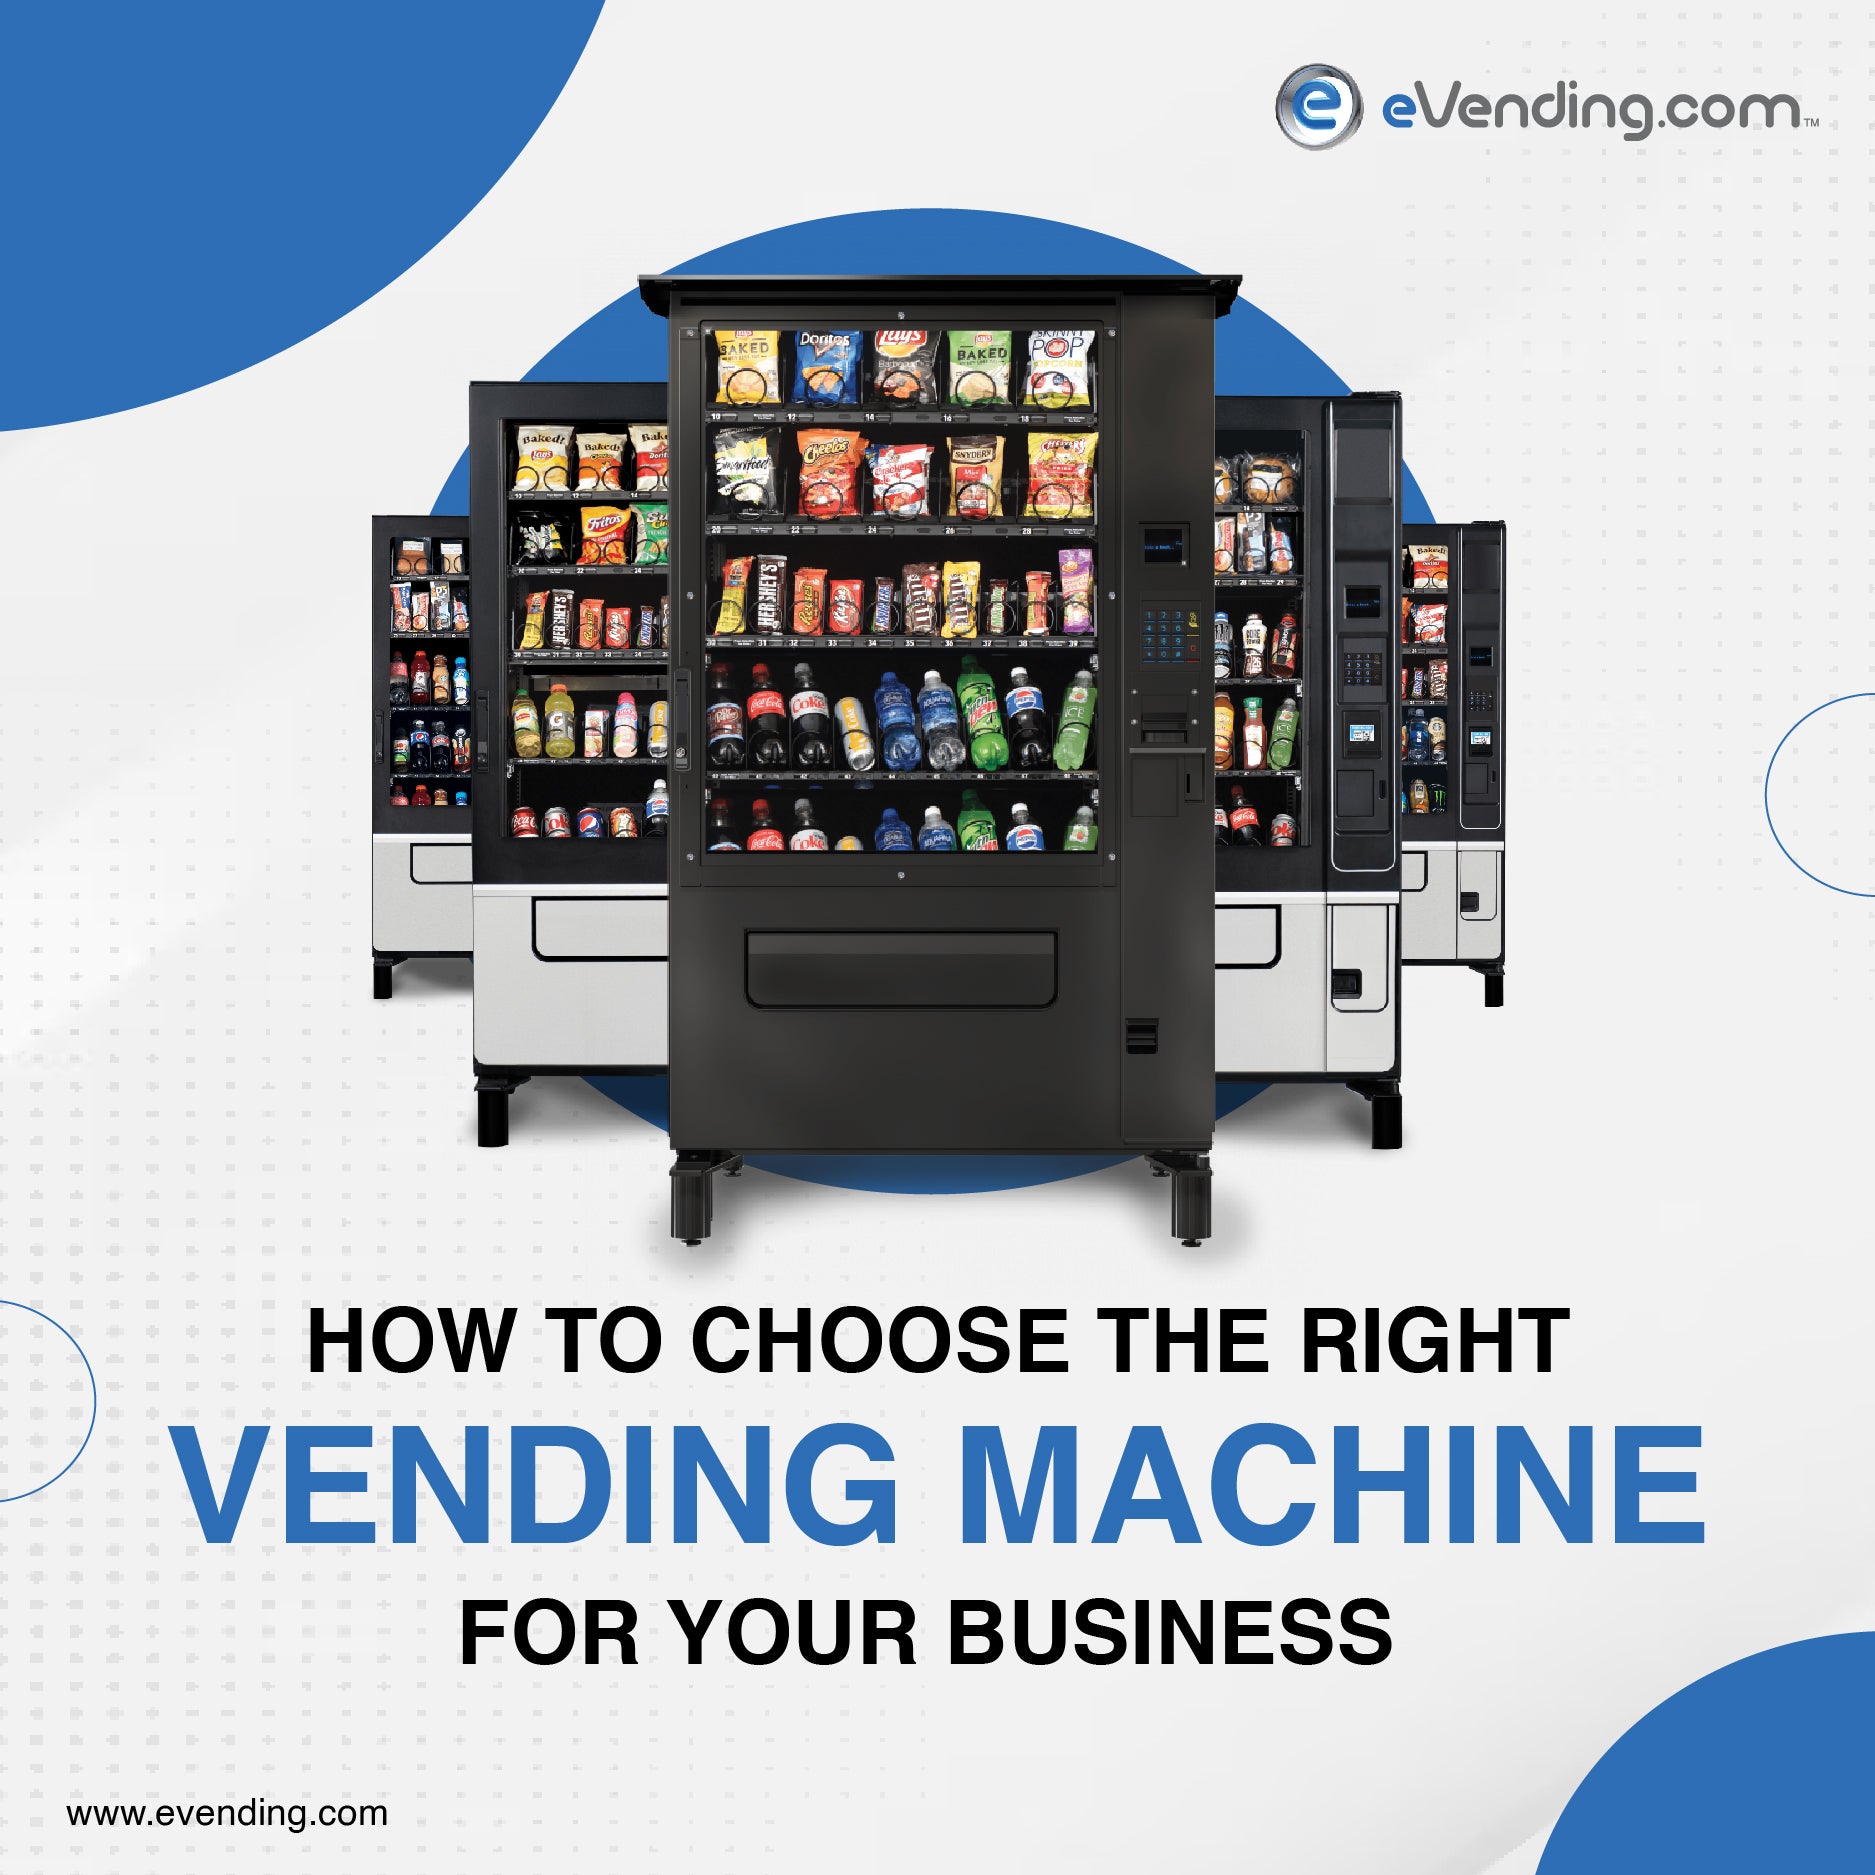 10 Factors to Choose the Right Machine for Your Business